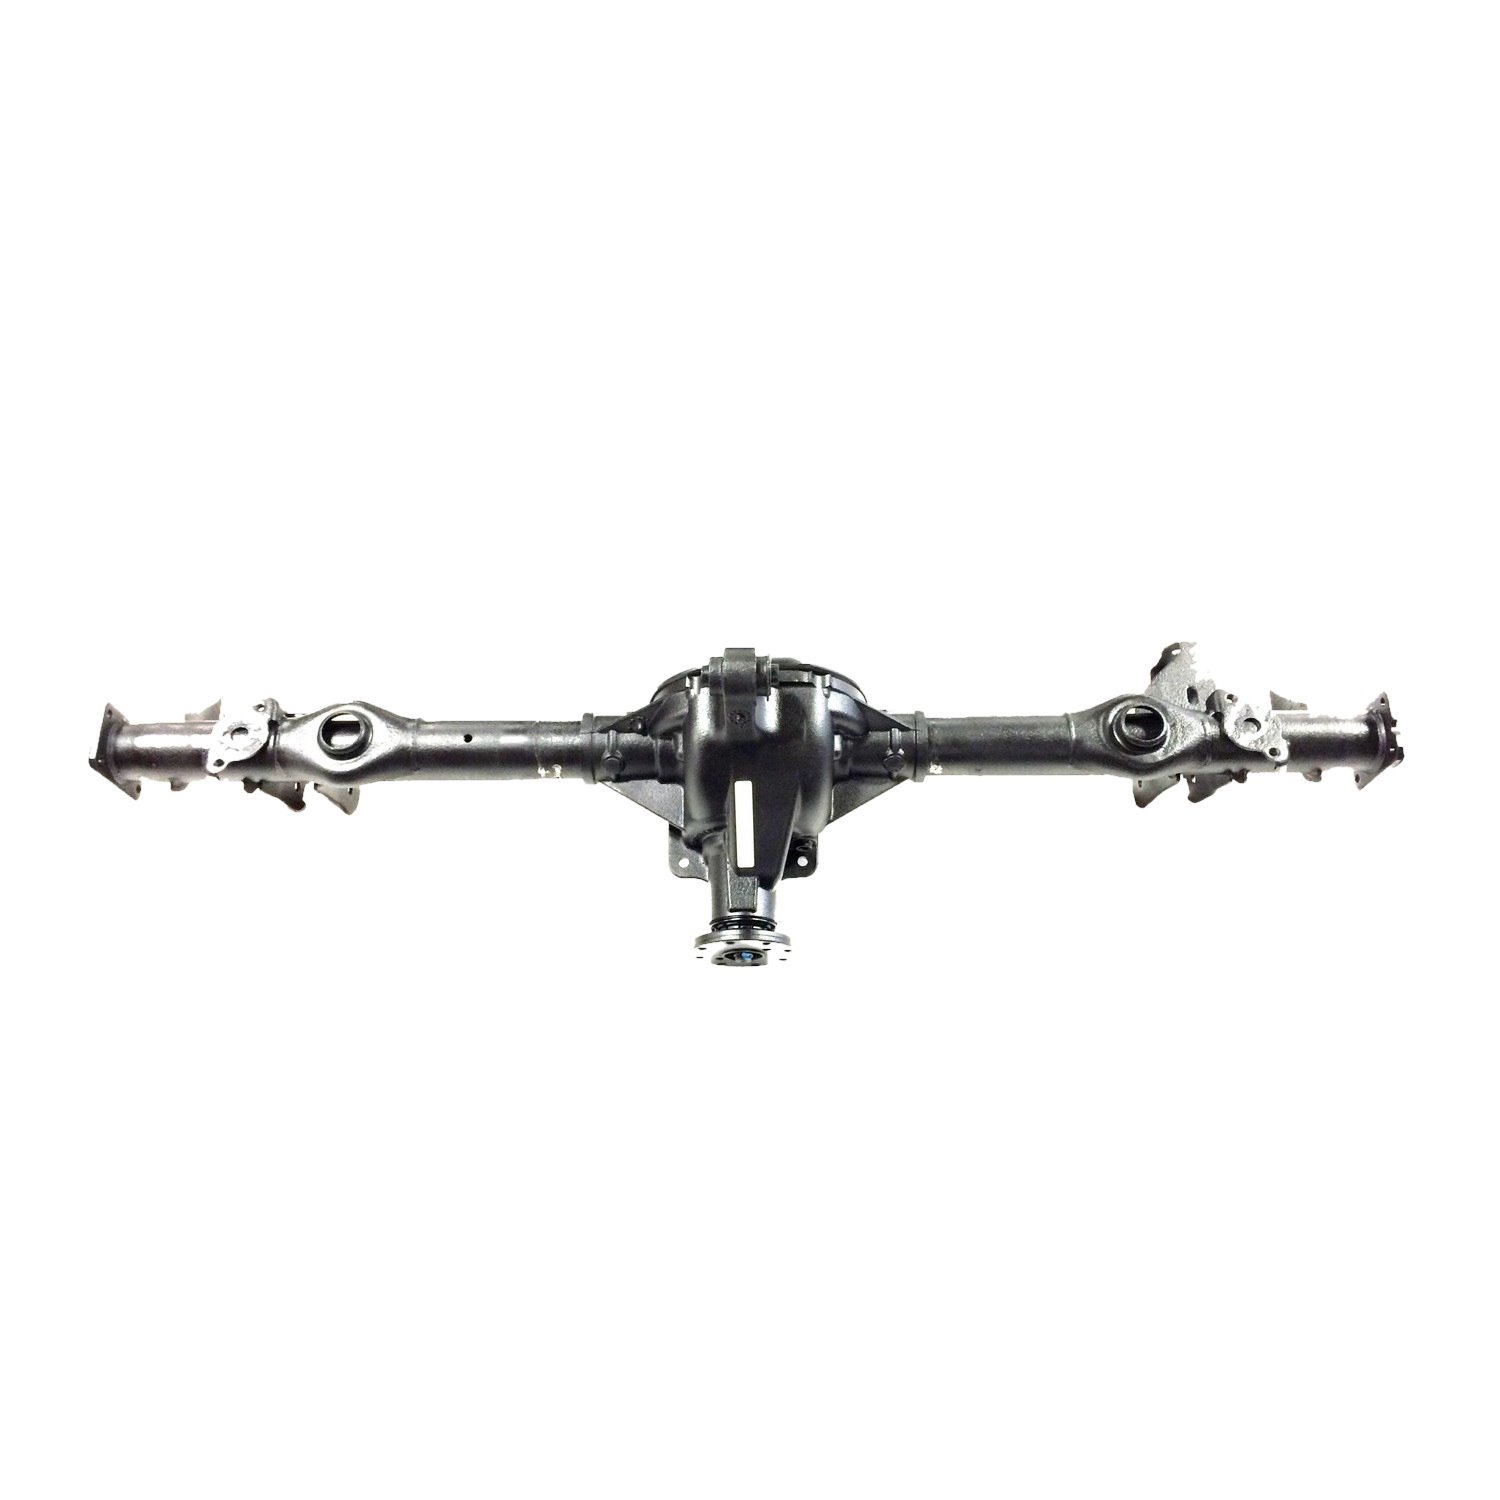 Reman Axle Assembly, Dana 80, 11.25 in., 4.30 Ratio, w/o Posi Traction